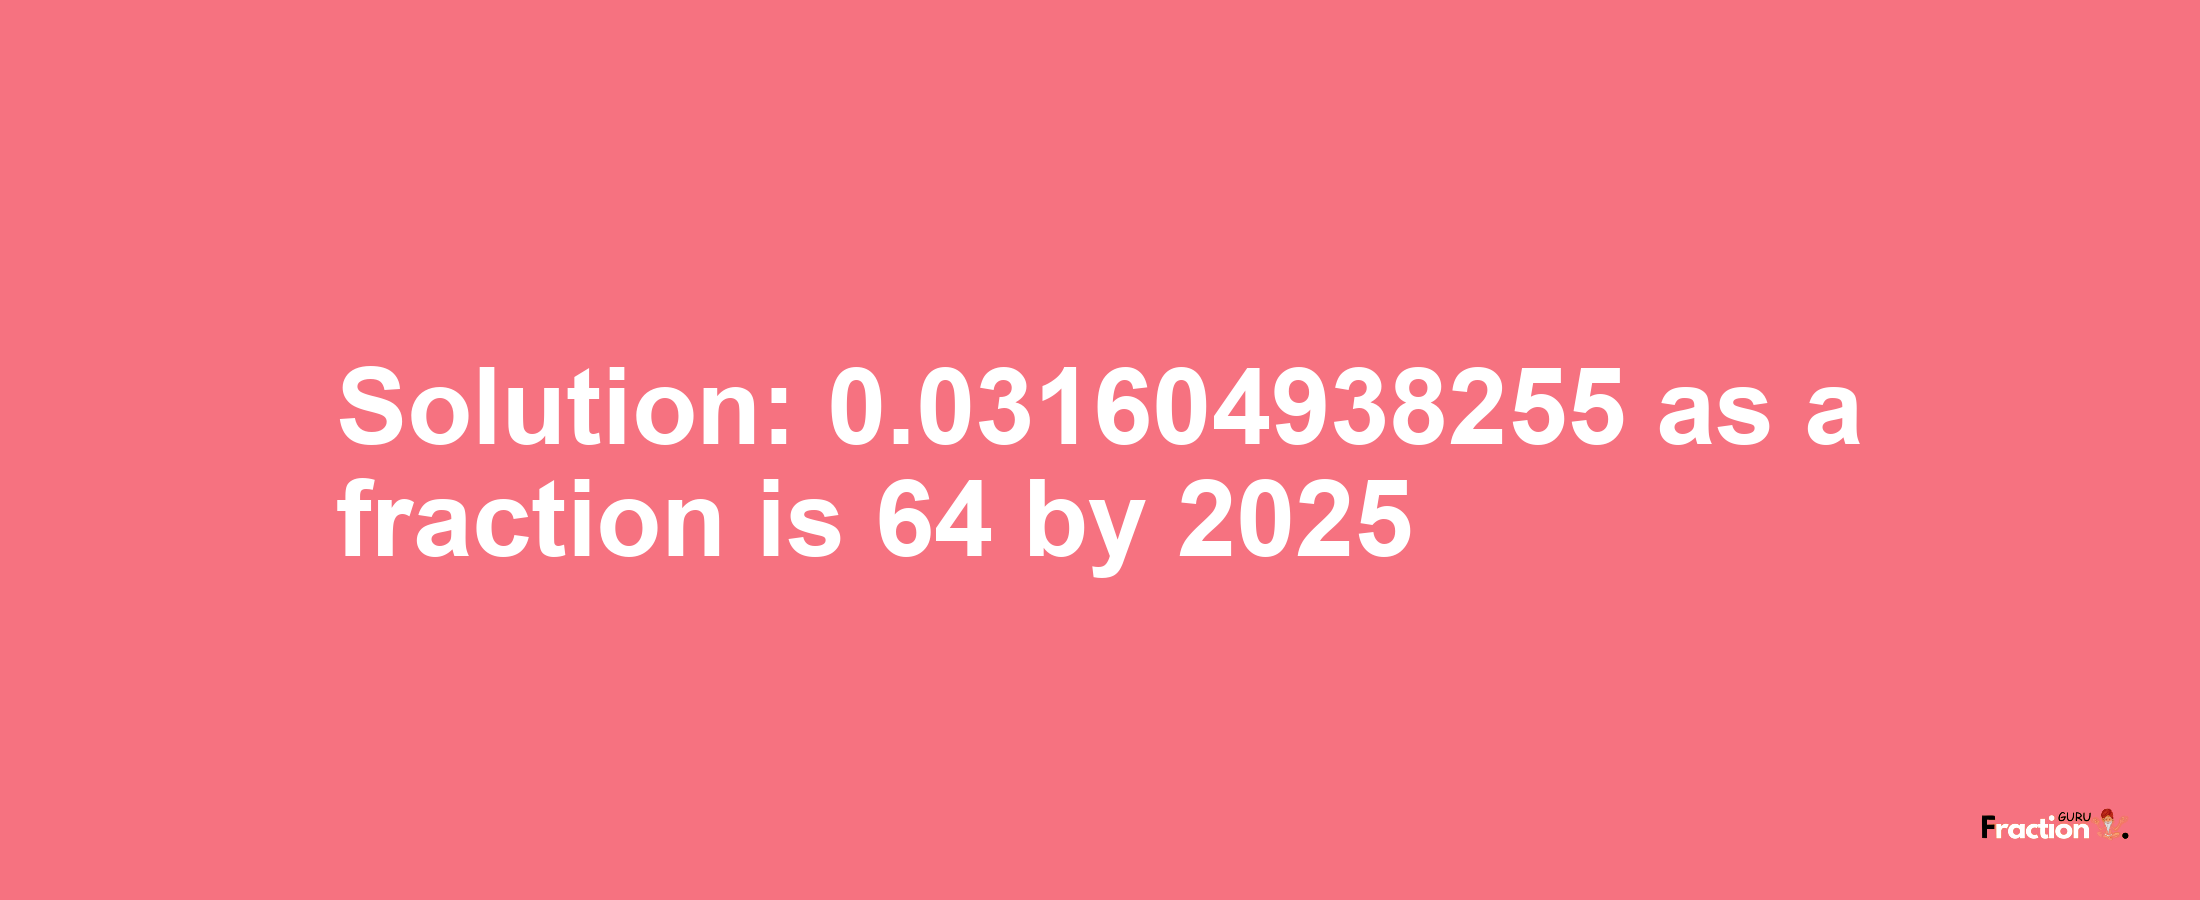 Solution:0.031604938255 as a fraction is 64/2025